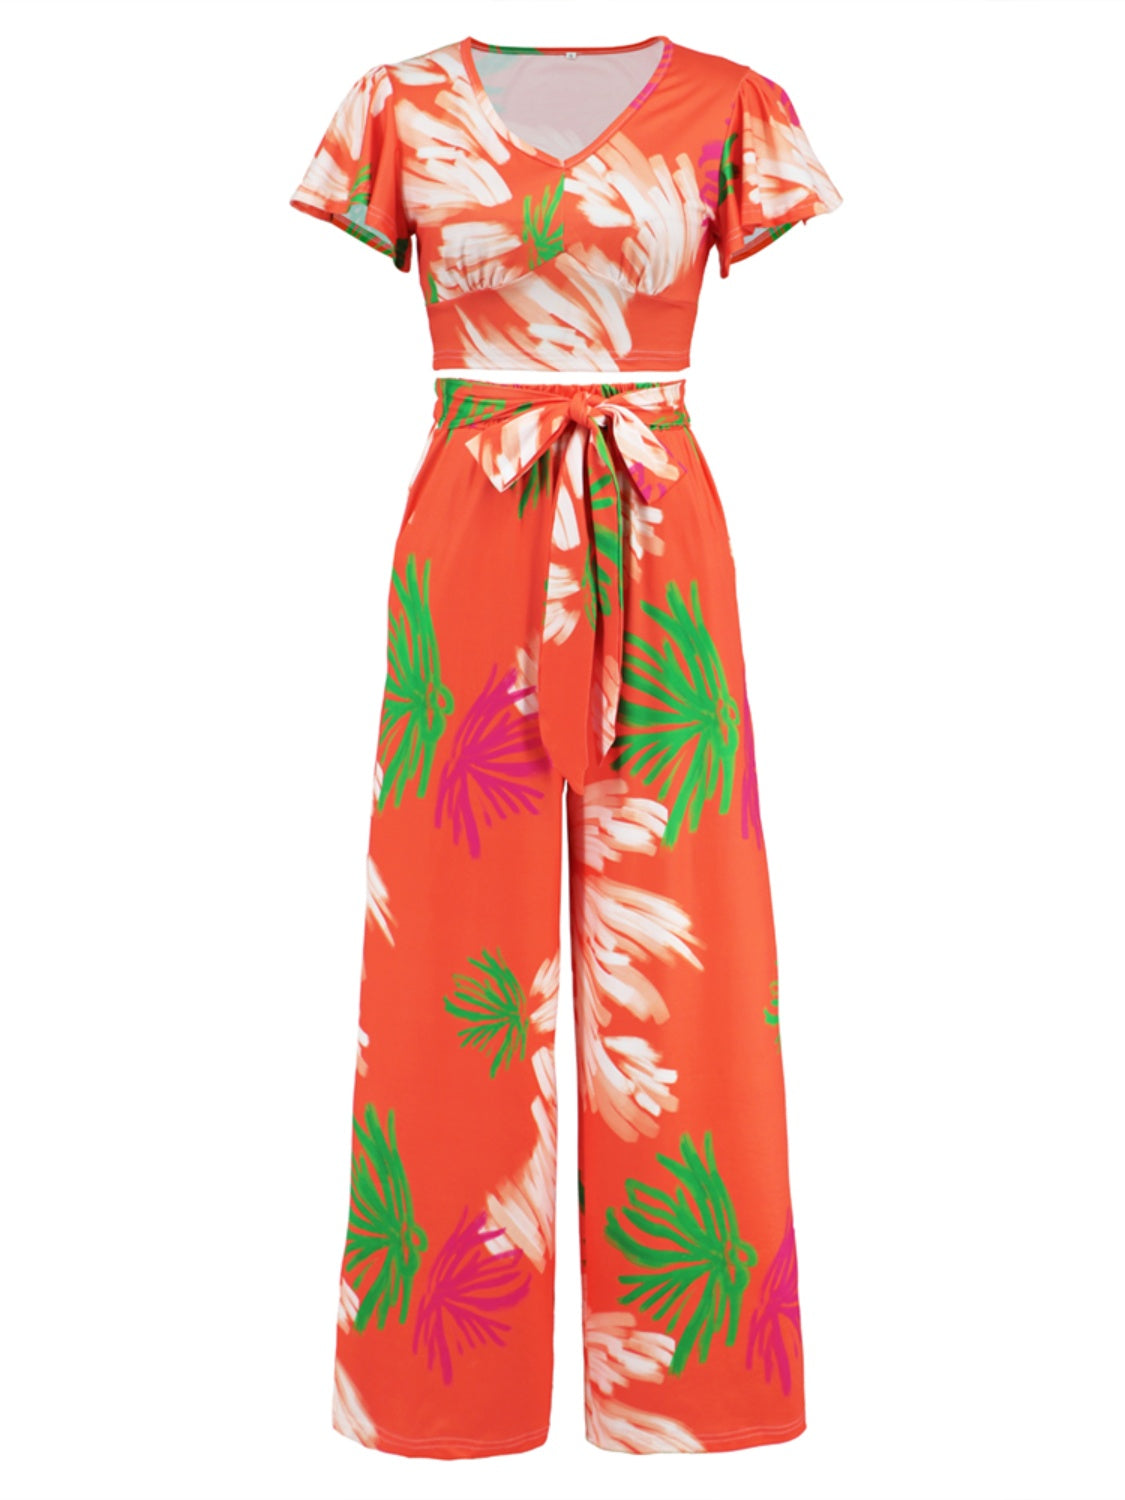 Tomato Printed V-Neck Top and Tied Pants Set Vacation